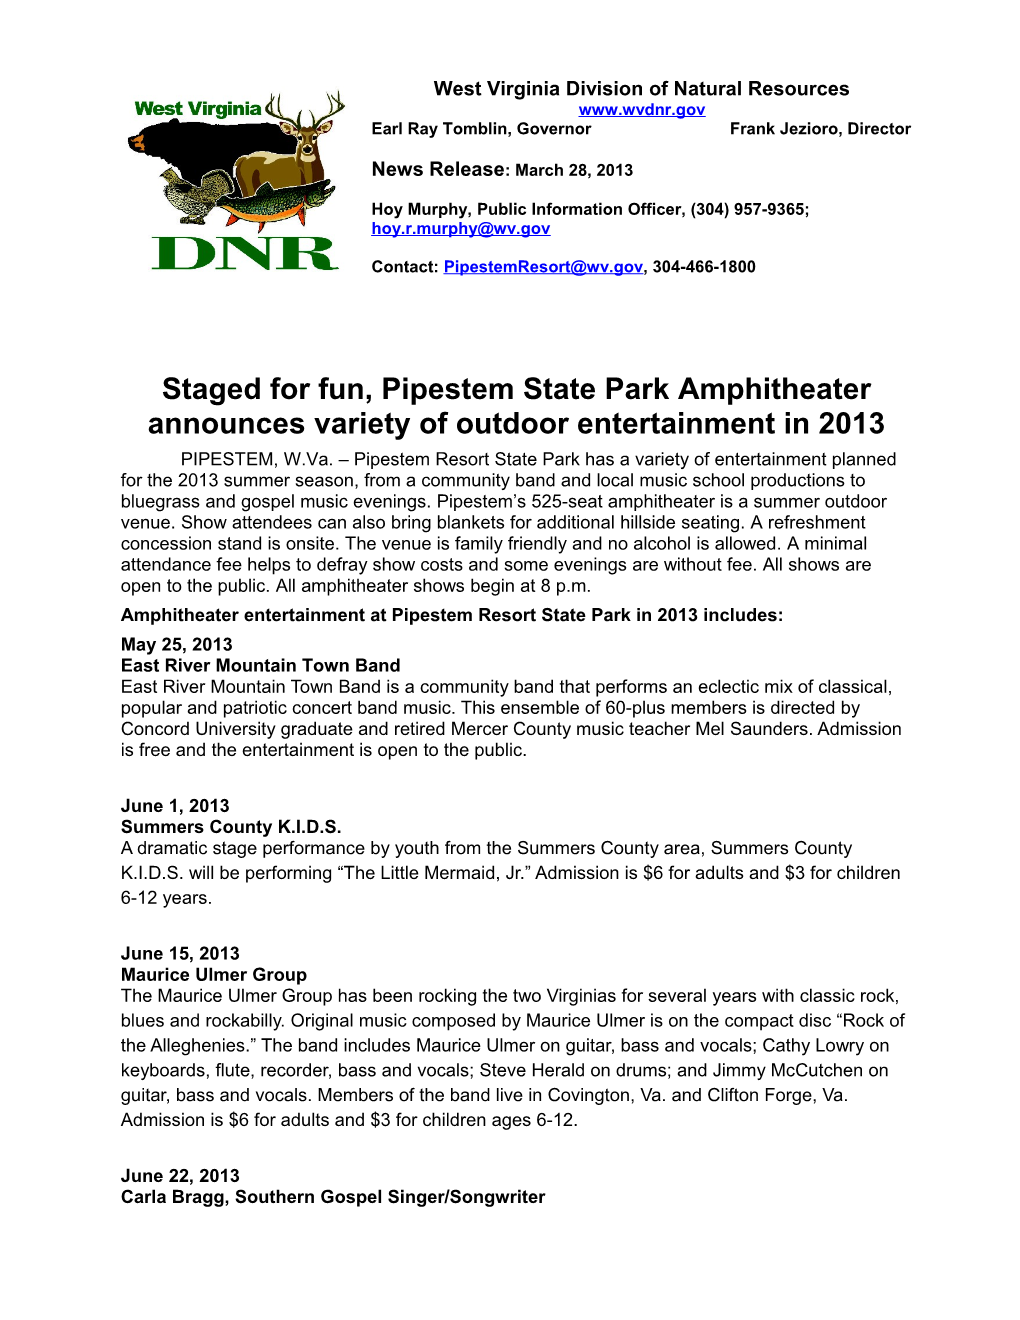 Staged for Fun, Pipestem State Park Amphitheater Announces Variety of Outdoor Entertainment